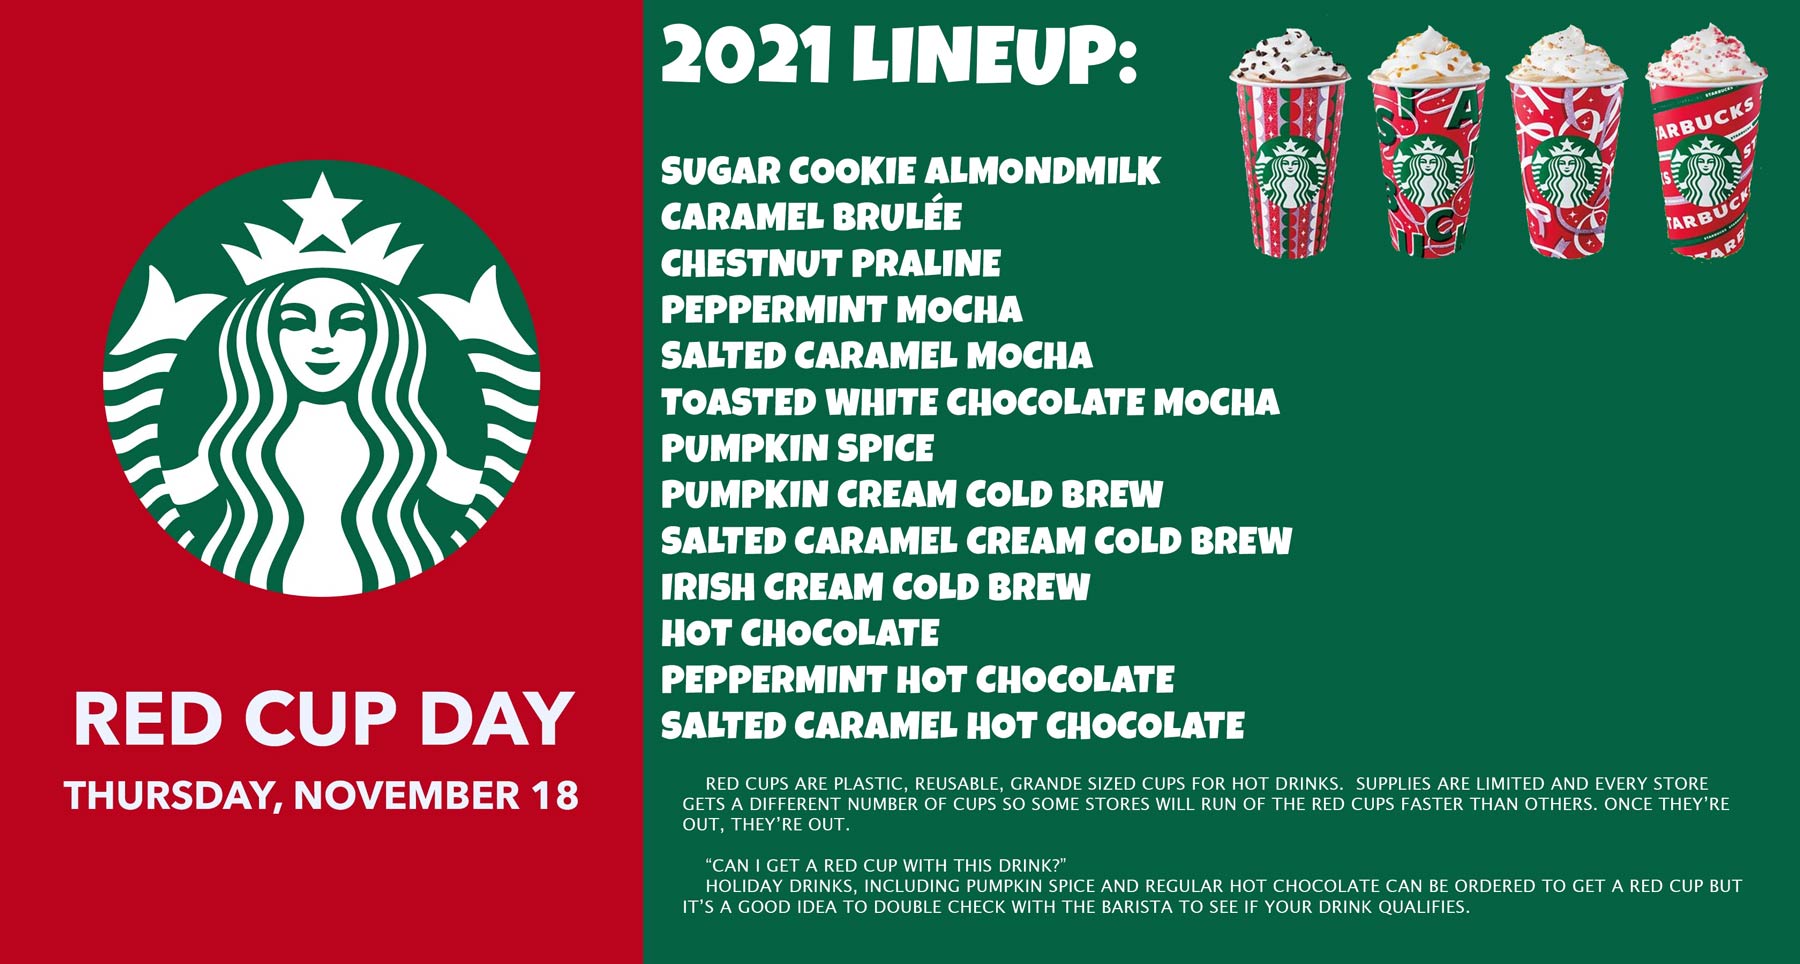 Starbucks restaurants Coupon  Holiday drinks begin the 4th while reusable Red Cup day is the 18th at Starbucks #starbucks 